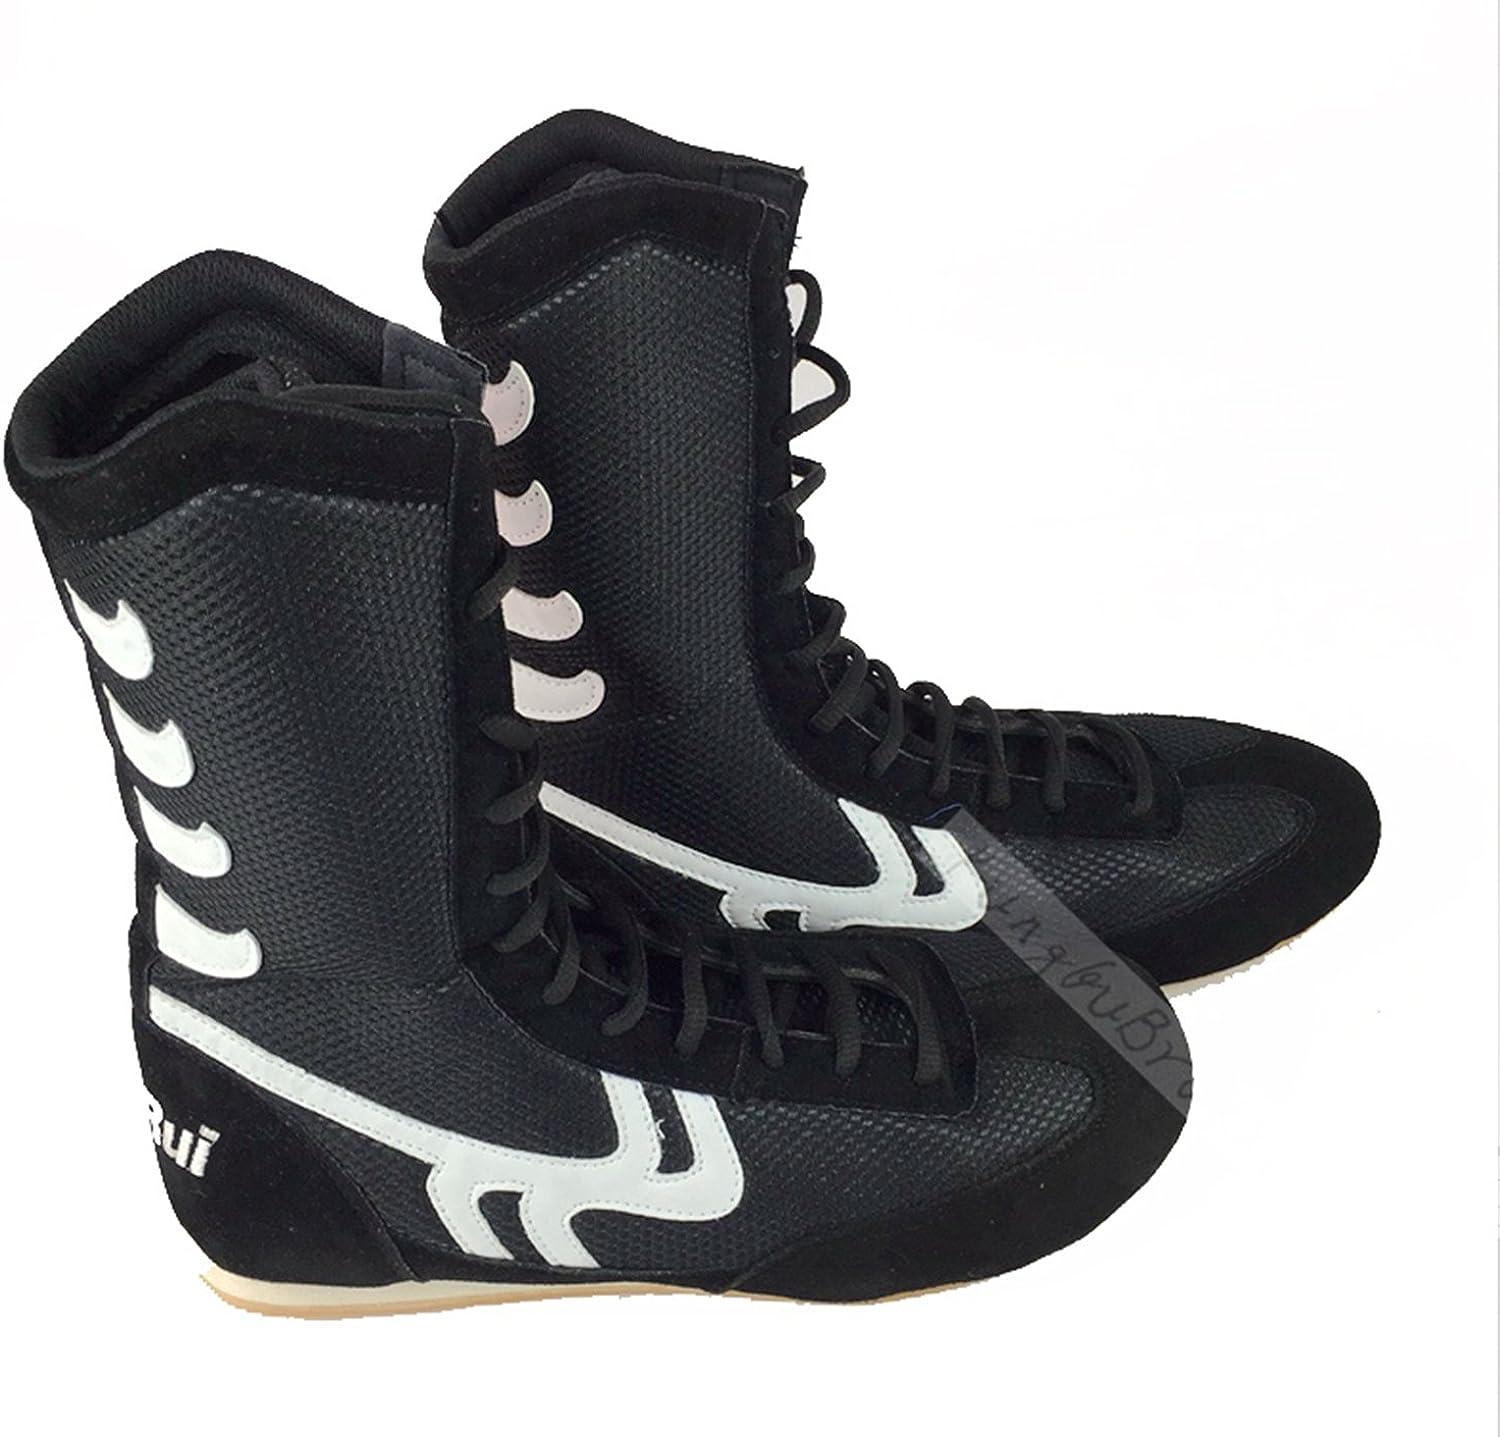 Day Key Wrestling Shoes Boxing Boots Rubber Sole Combat Training Shoes ...